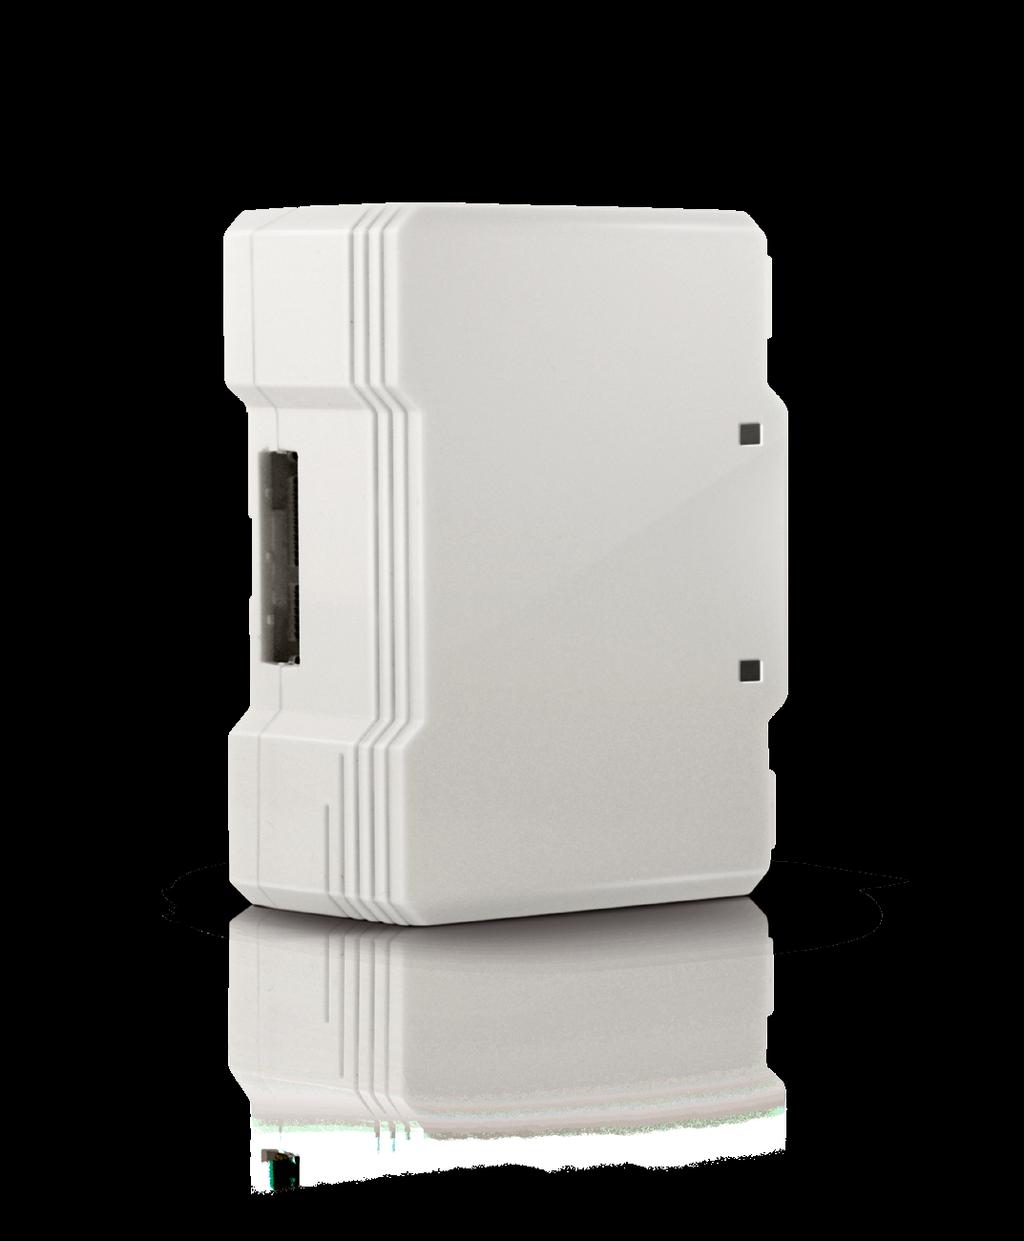 Backup expansion module for the Zipabox Convert Zipabox to virtualy undefeatable home security station Most important benefit of a connected home is increased home security.